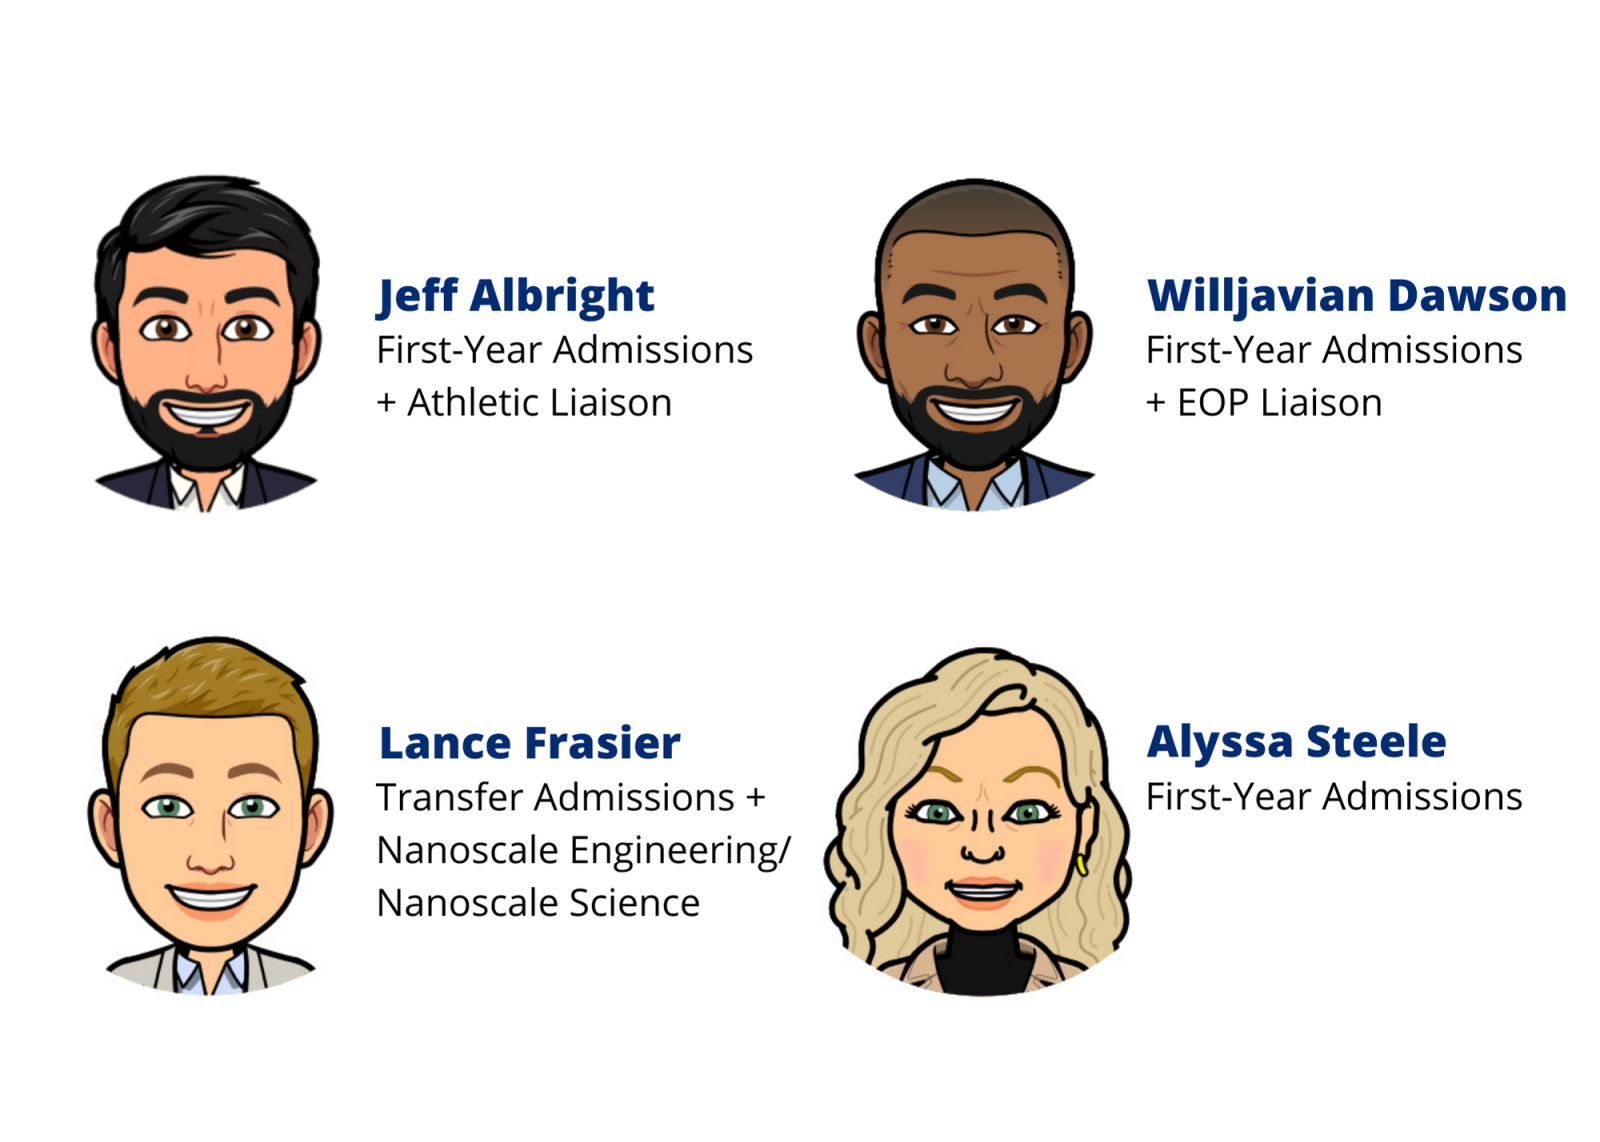 Image of five Admissions Advisors with Names and Titles: Jeff Albright, First-Year Admissions + Athletic Liaison, McKenzie Albrecht, Nanoscale Science/Nanoscale Engineering + Transfer Admissions, Willjavian Dawson, First-Year Admissions + EOP Liaison, Lance Frasier, Transfer Admissions + Nanoscale Science/Nanoscale Engineering, and Alyssa Steele, First-Year Admissions